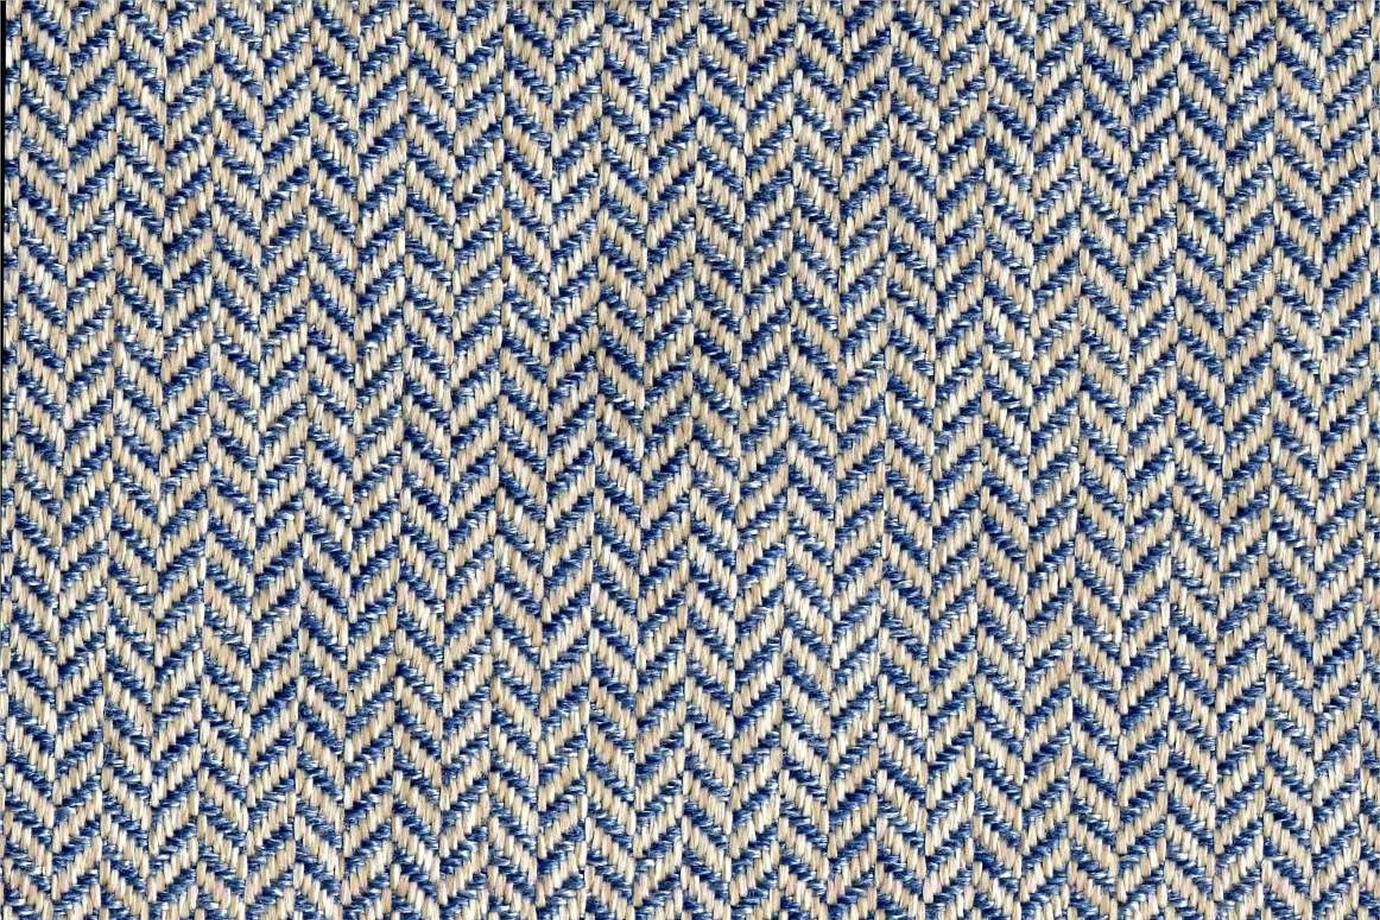 J3129 CANCRO 001 Jeans home decoration fabric